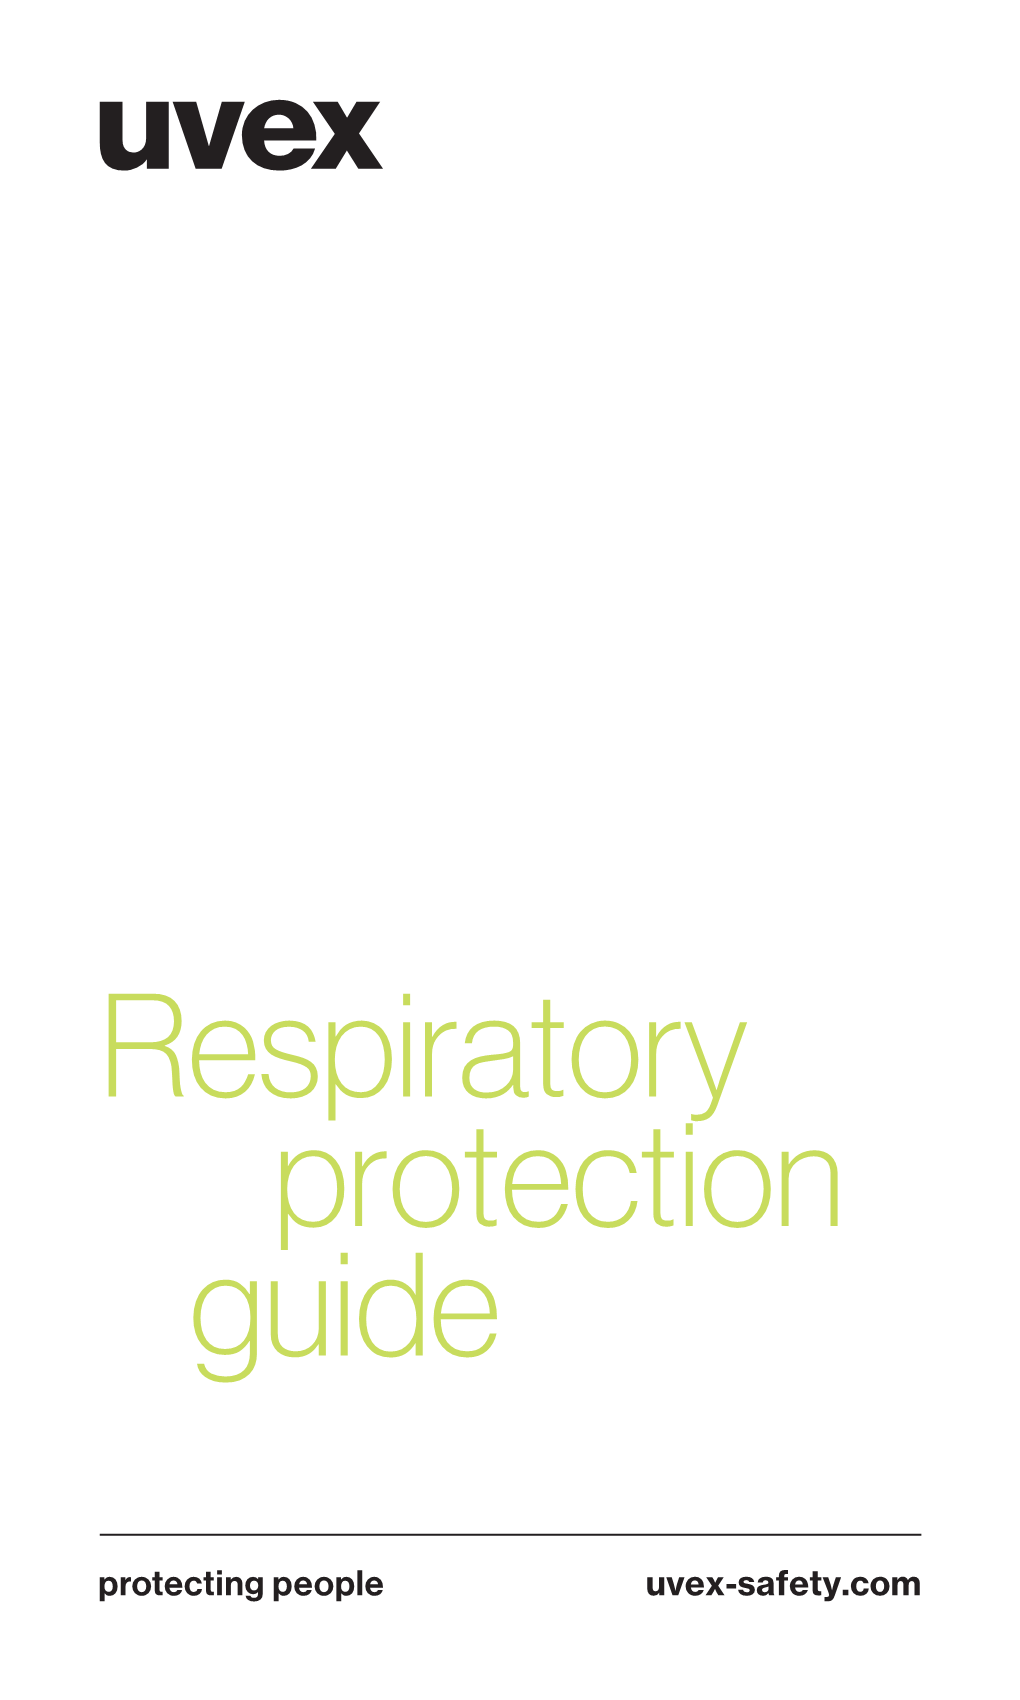 Respiratory Protection Guide